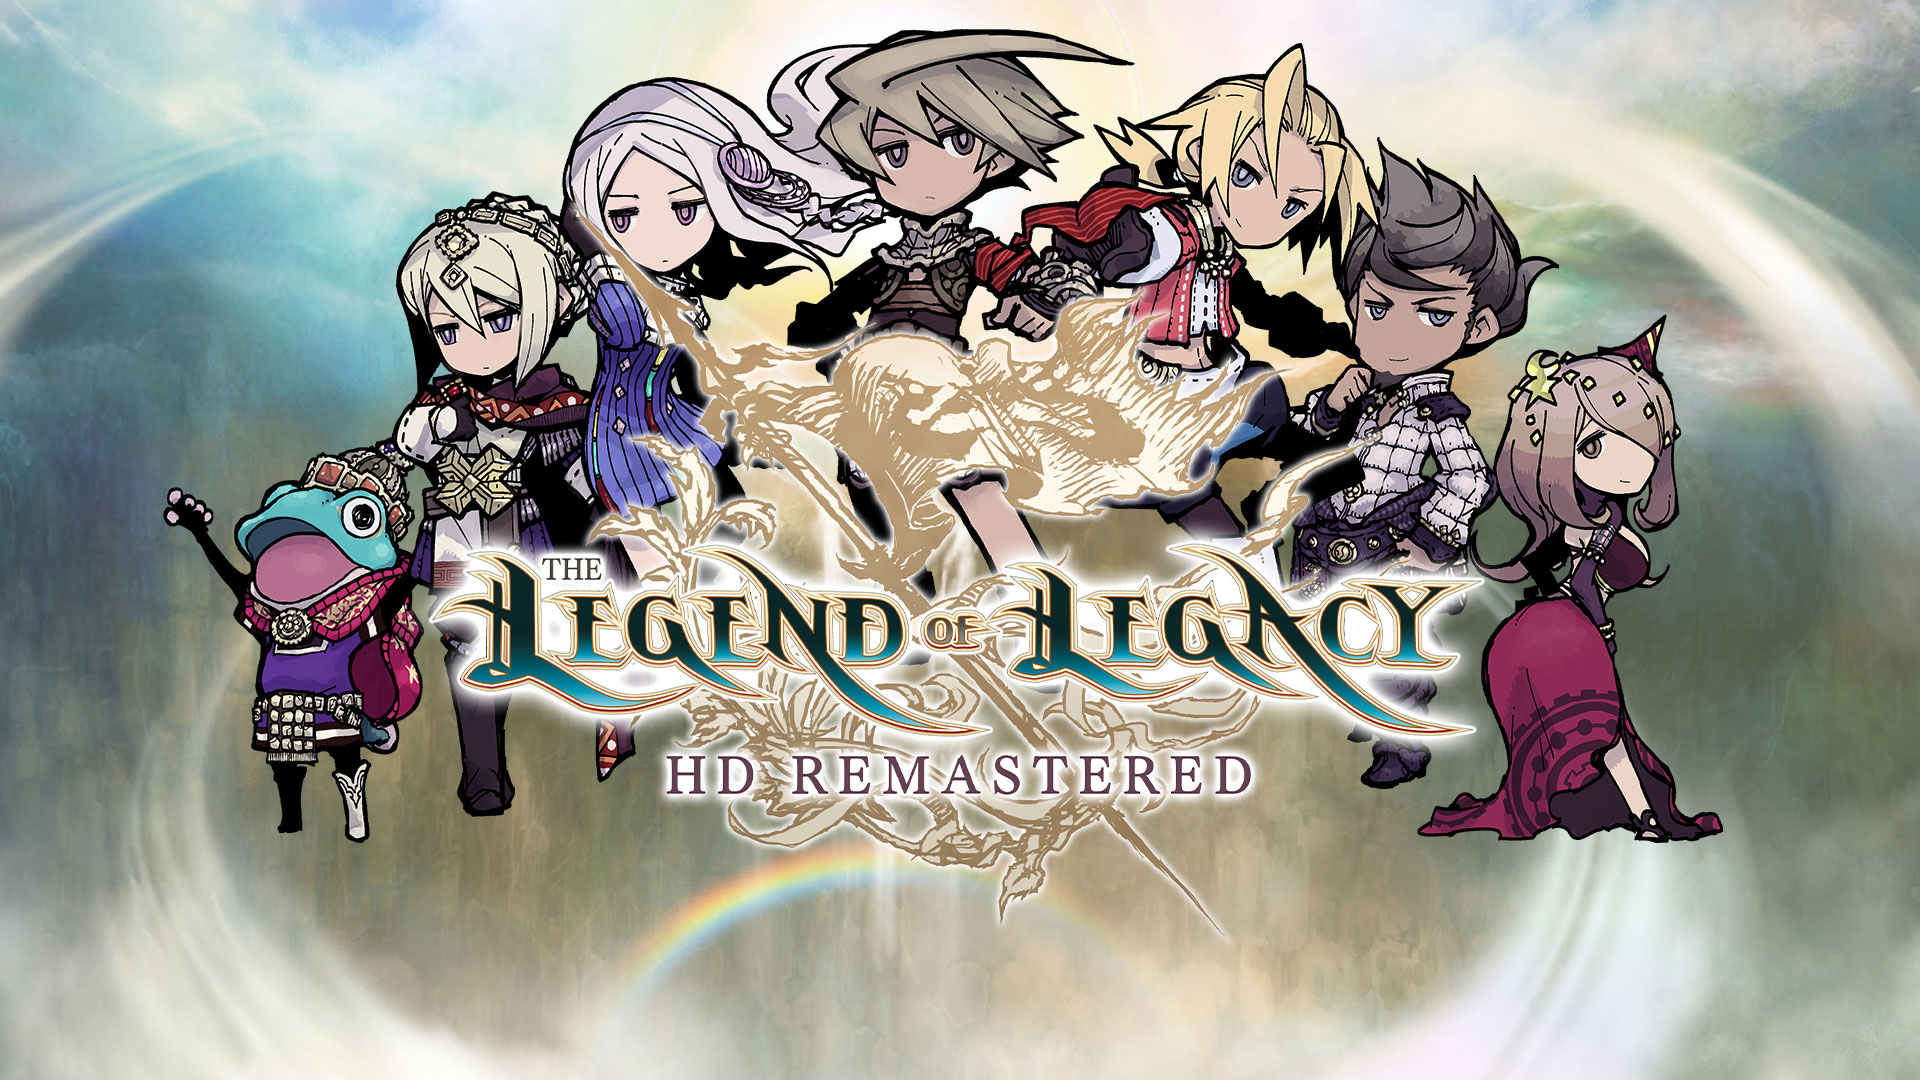 My Thoughts on The Legend of Legacy HD Remastered